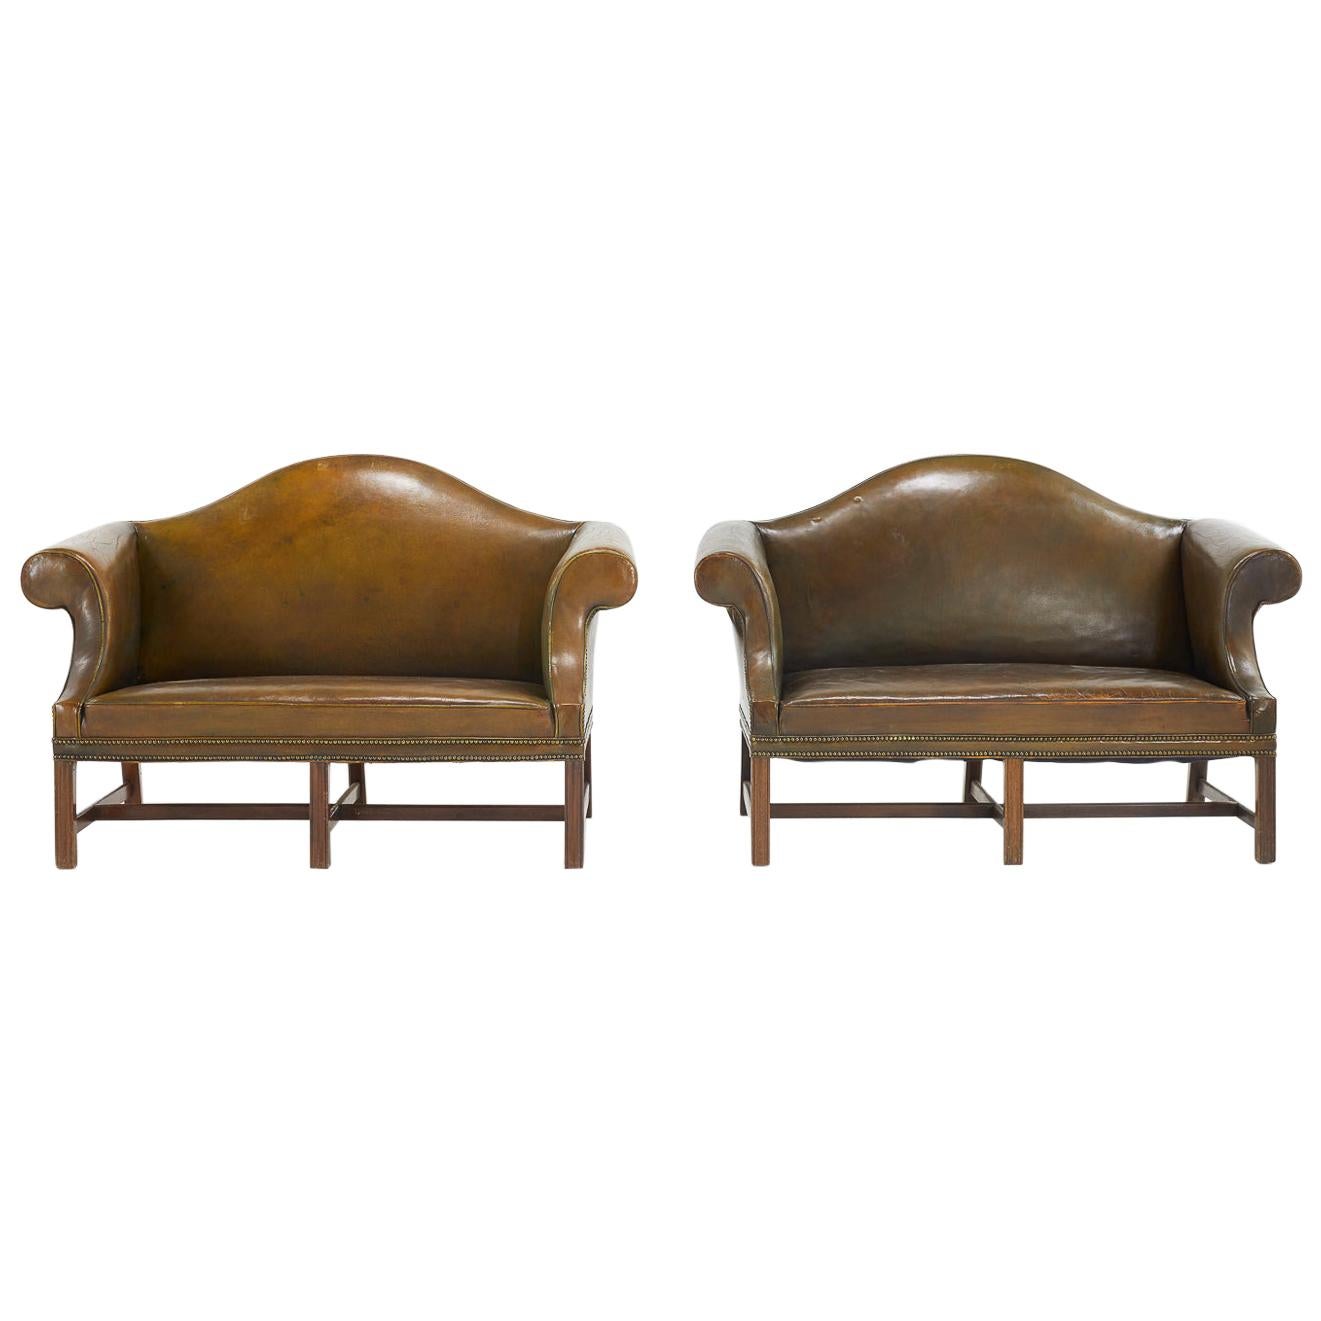 Pair of English George III Style Camelback Leather Sofas For Sale